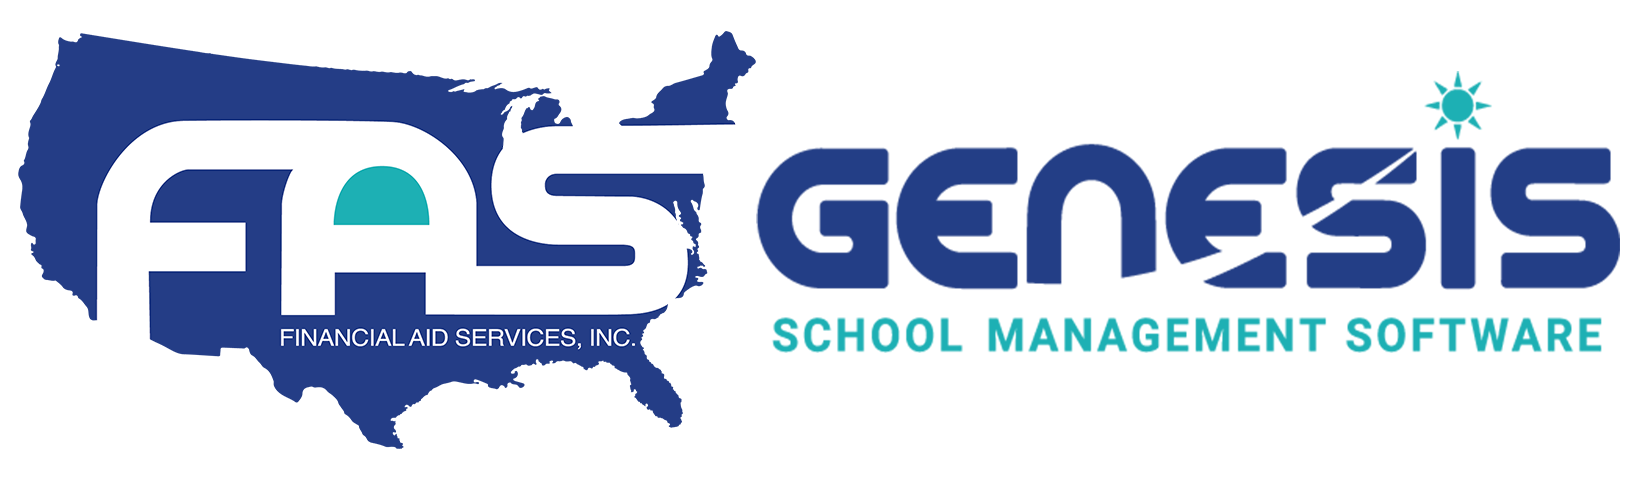 Financial Aid Services & Genesis Software